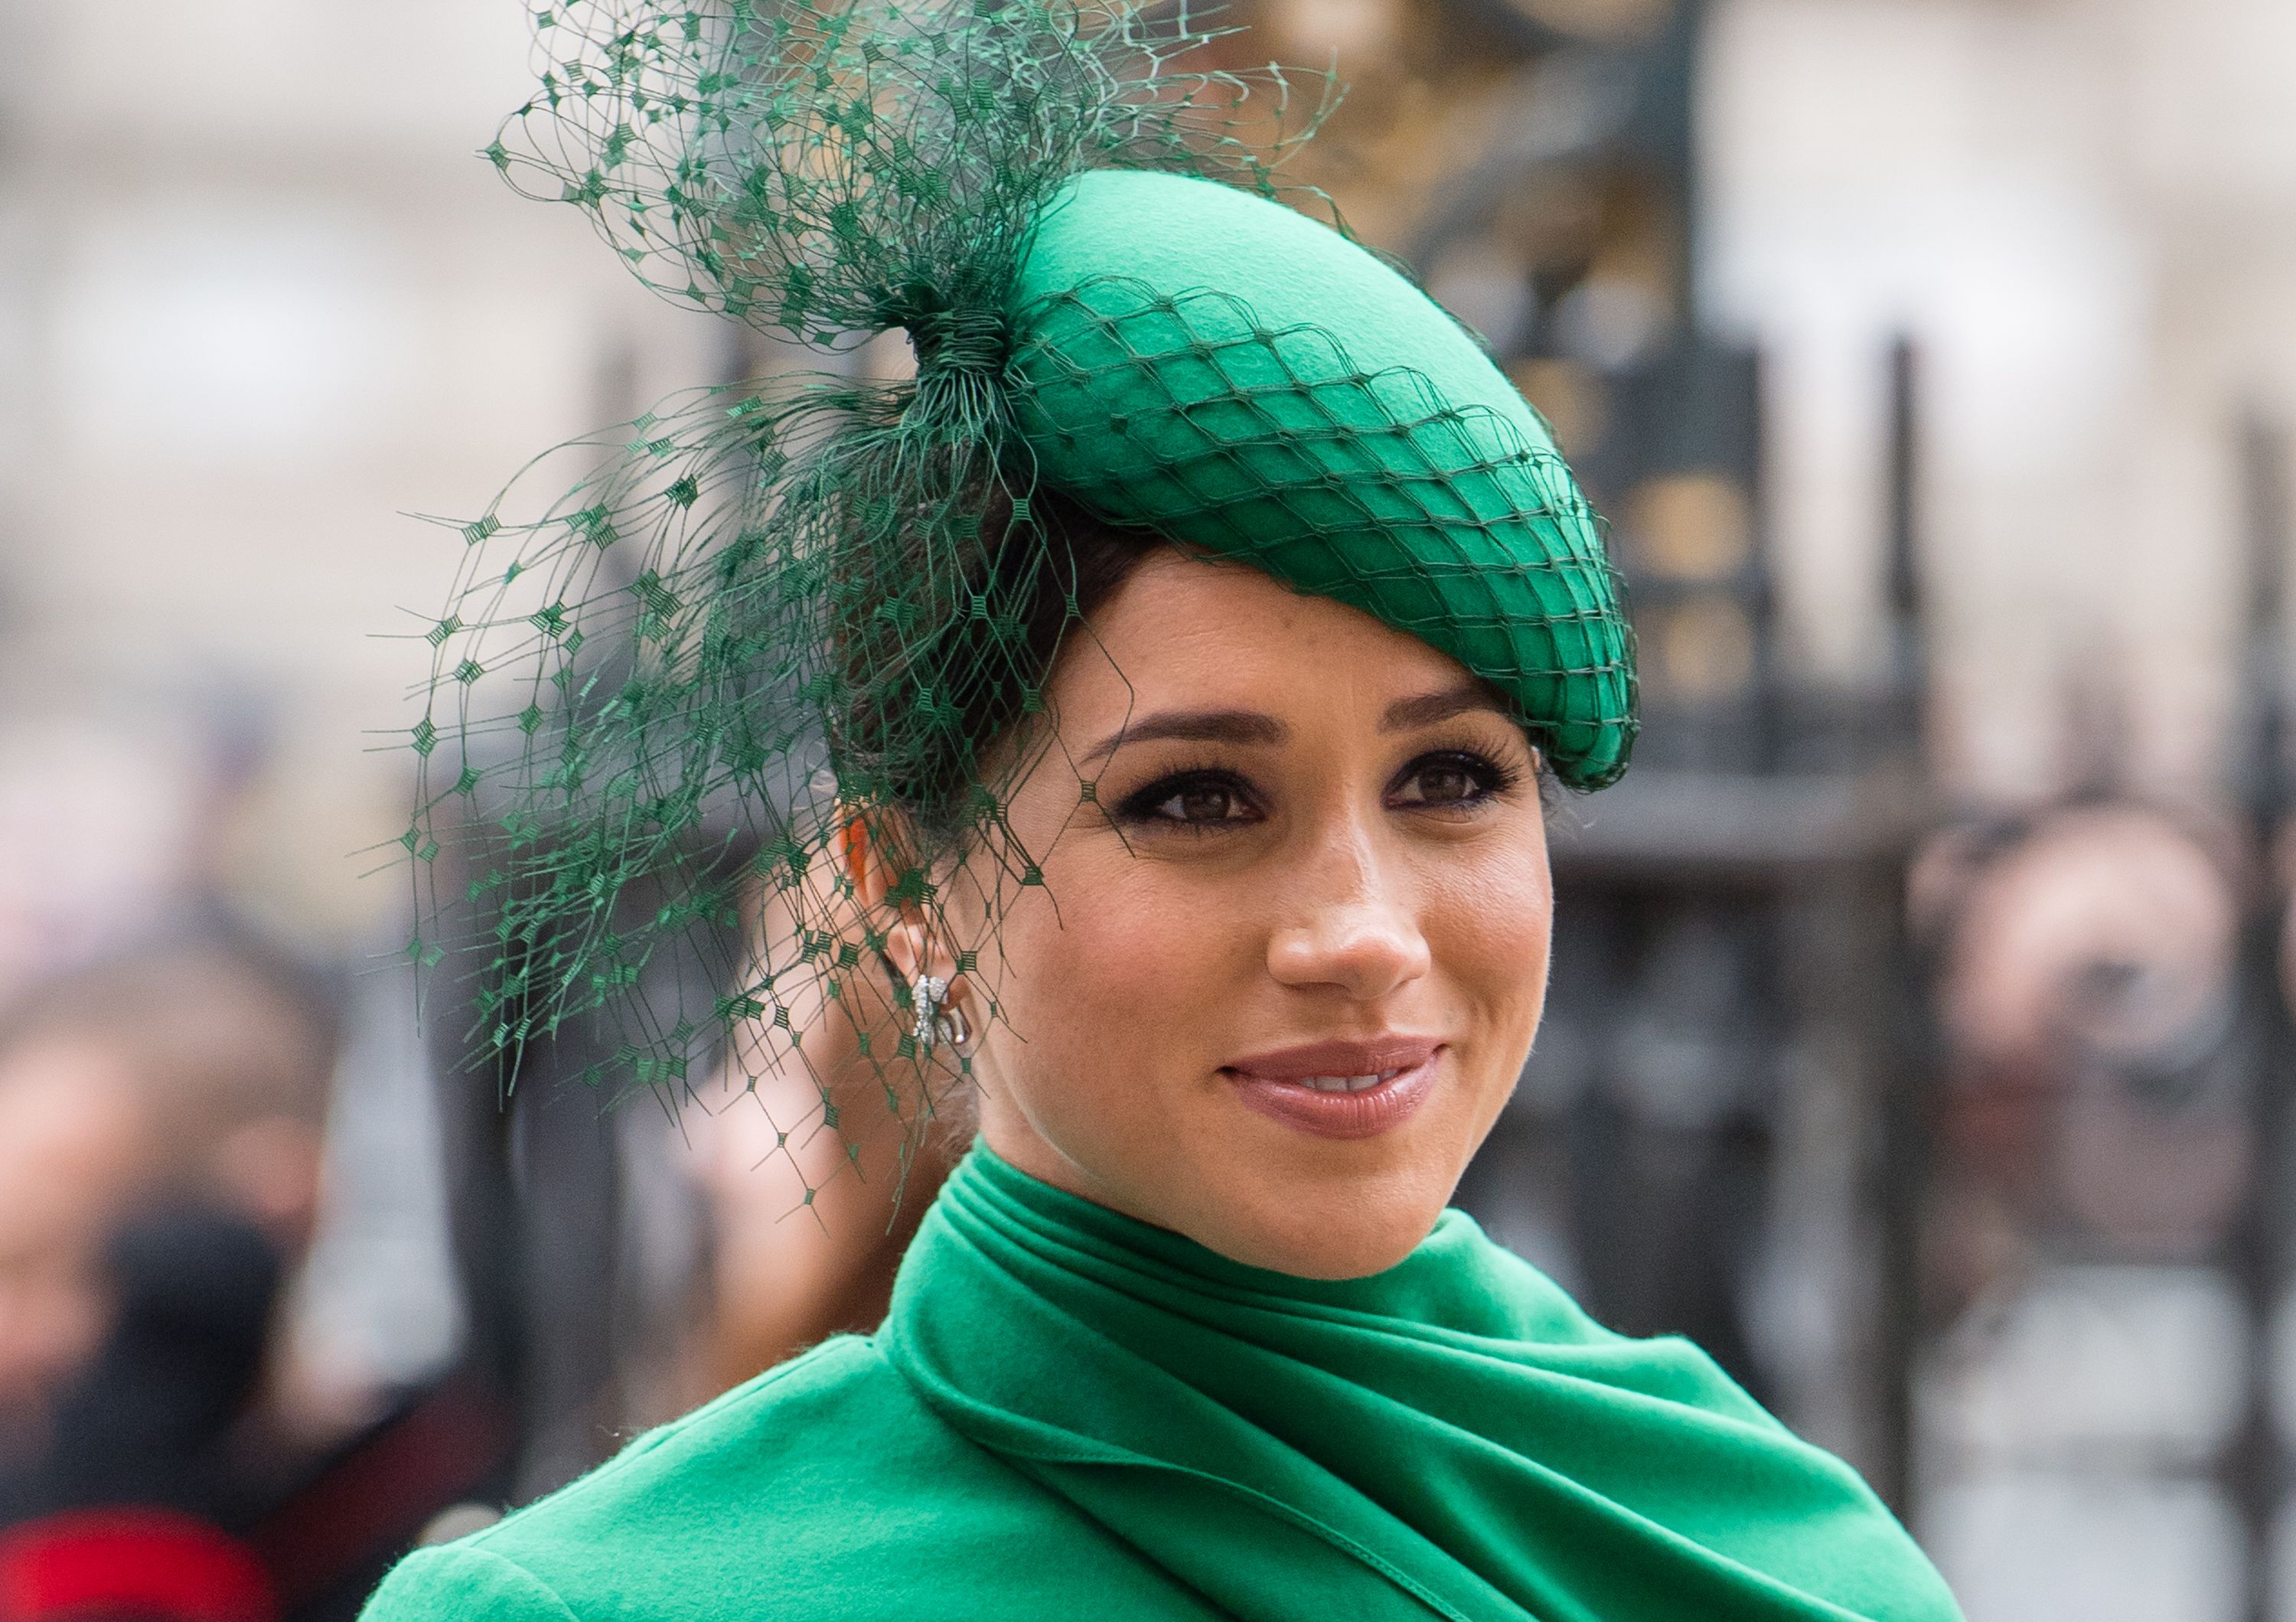 Meghan Markle at the Commonwealth Day Service 2020 on March 09, 2020 | Photo: Getty Images